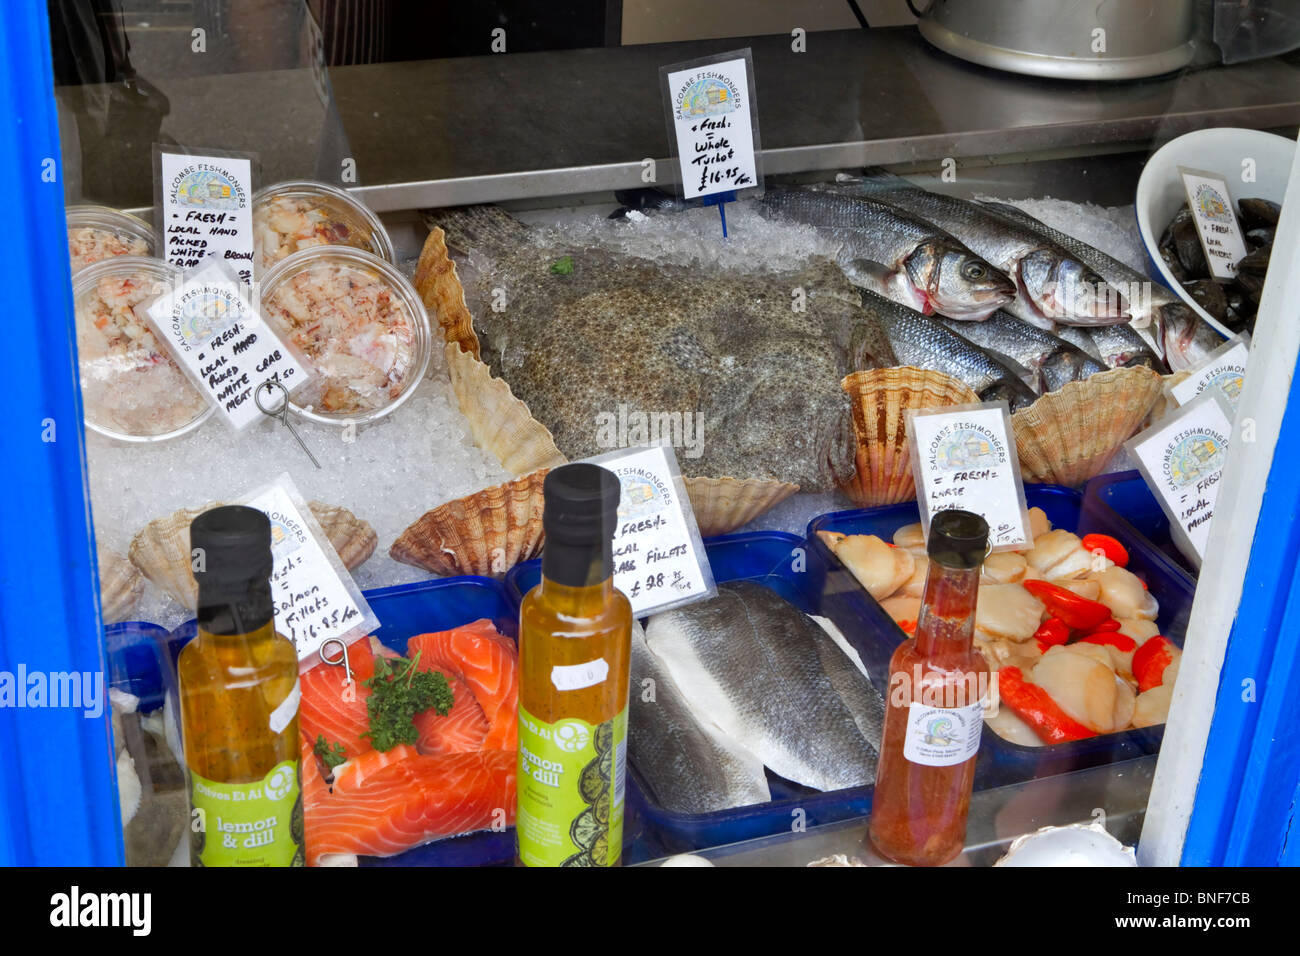 Window of a fishmongers in Salcombe, South Hams, Devon. Fresh fish and shellfish from local waters are for sale. Stock Photo